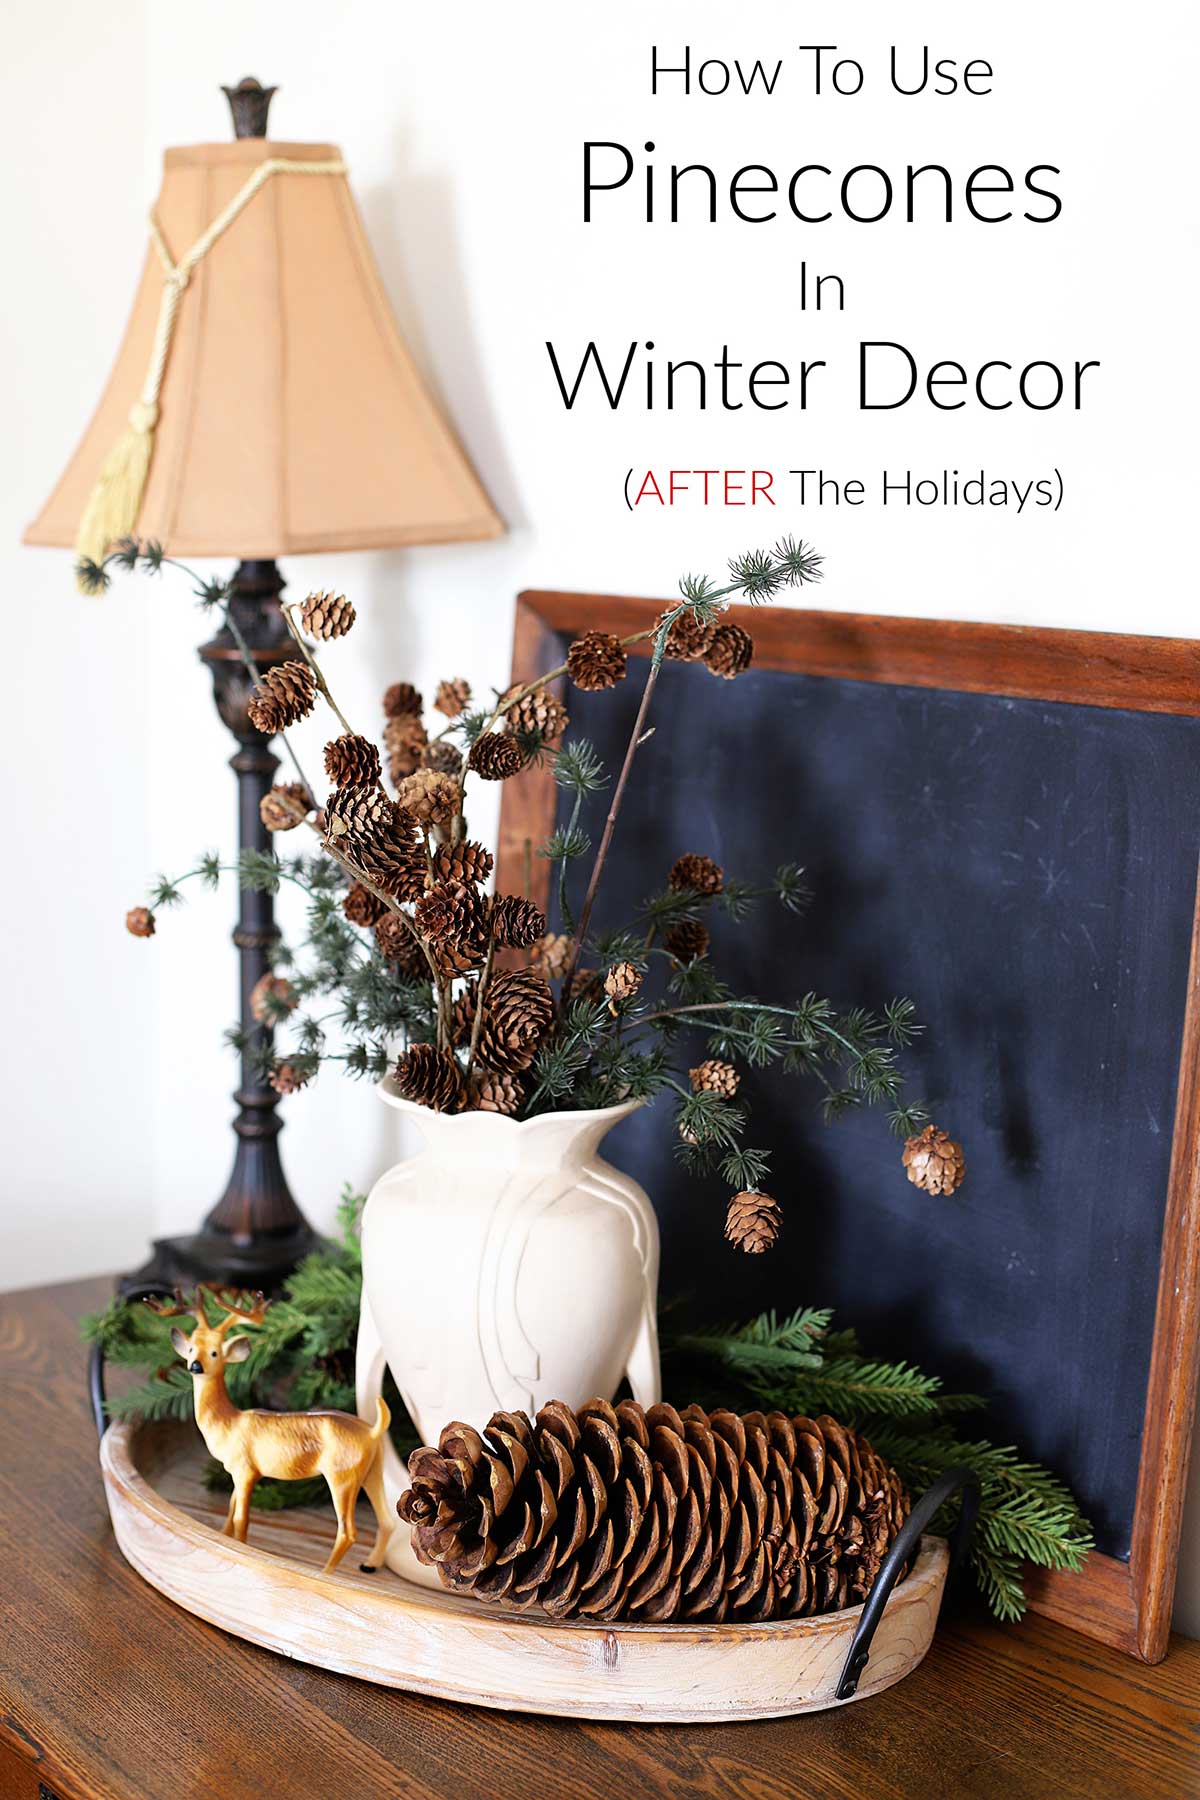 Learn how to use pinecones for winter home decor. Decorating during that awkward time between Christmas decor coming down and spring decor going up.